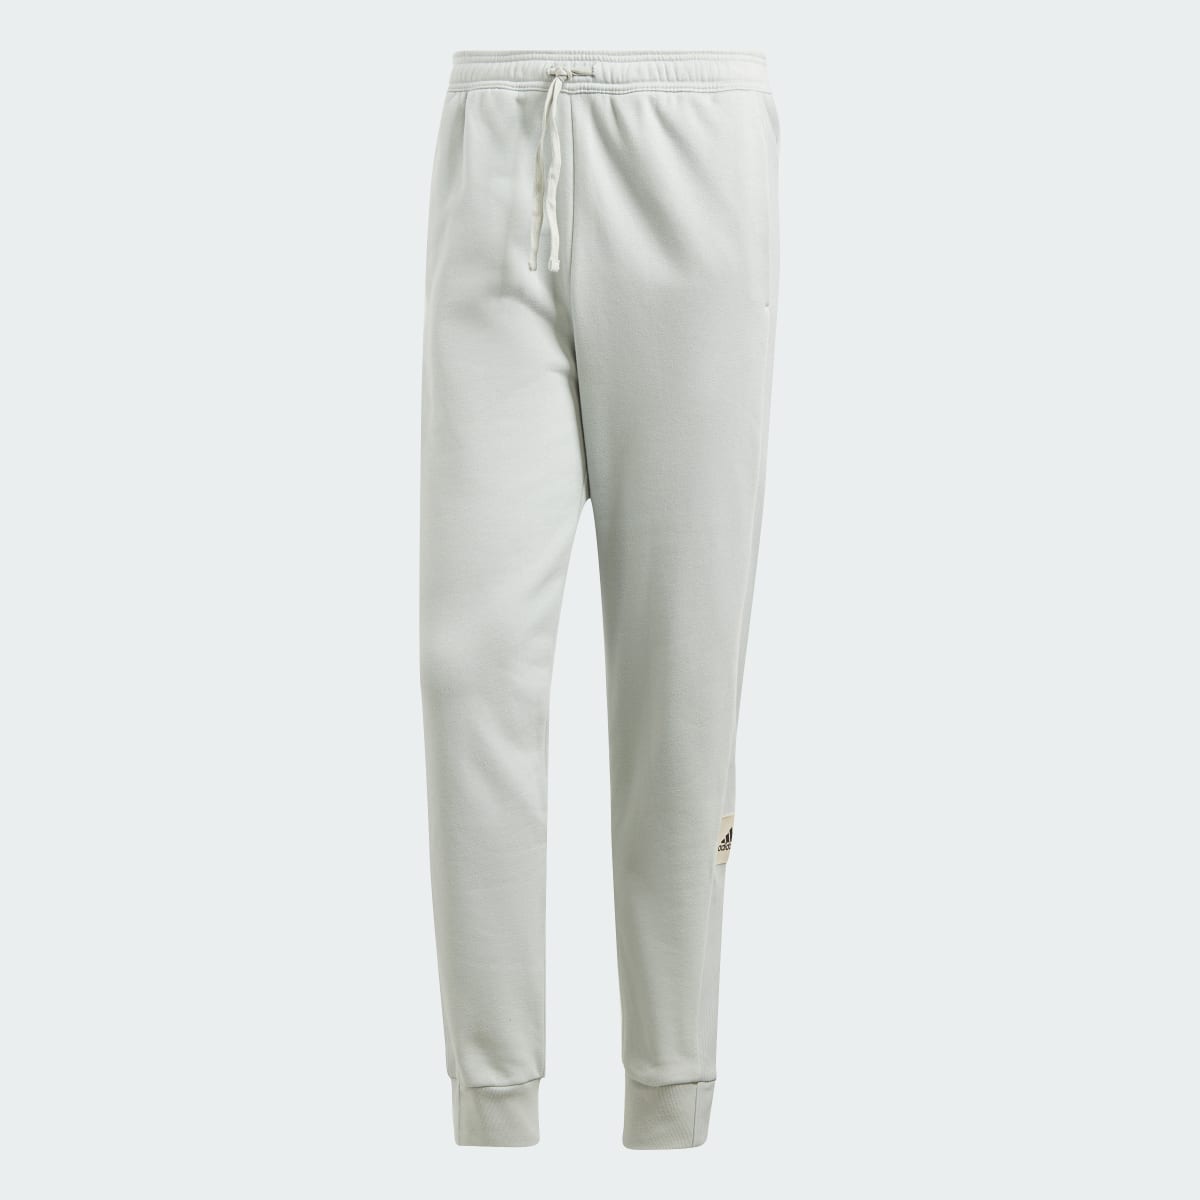 Adidas Lounge French Terry Pants. 5